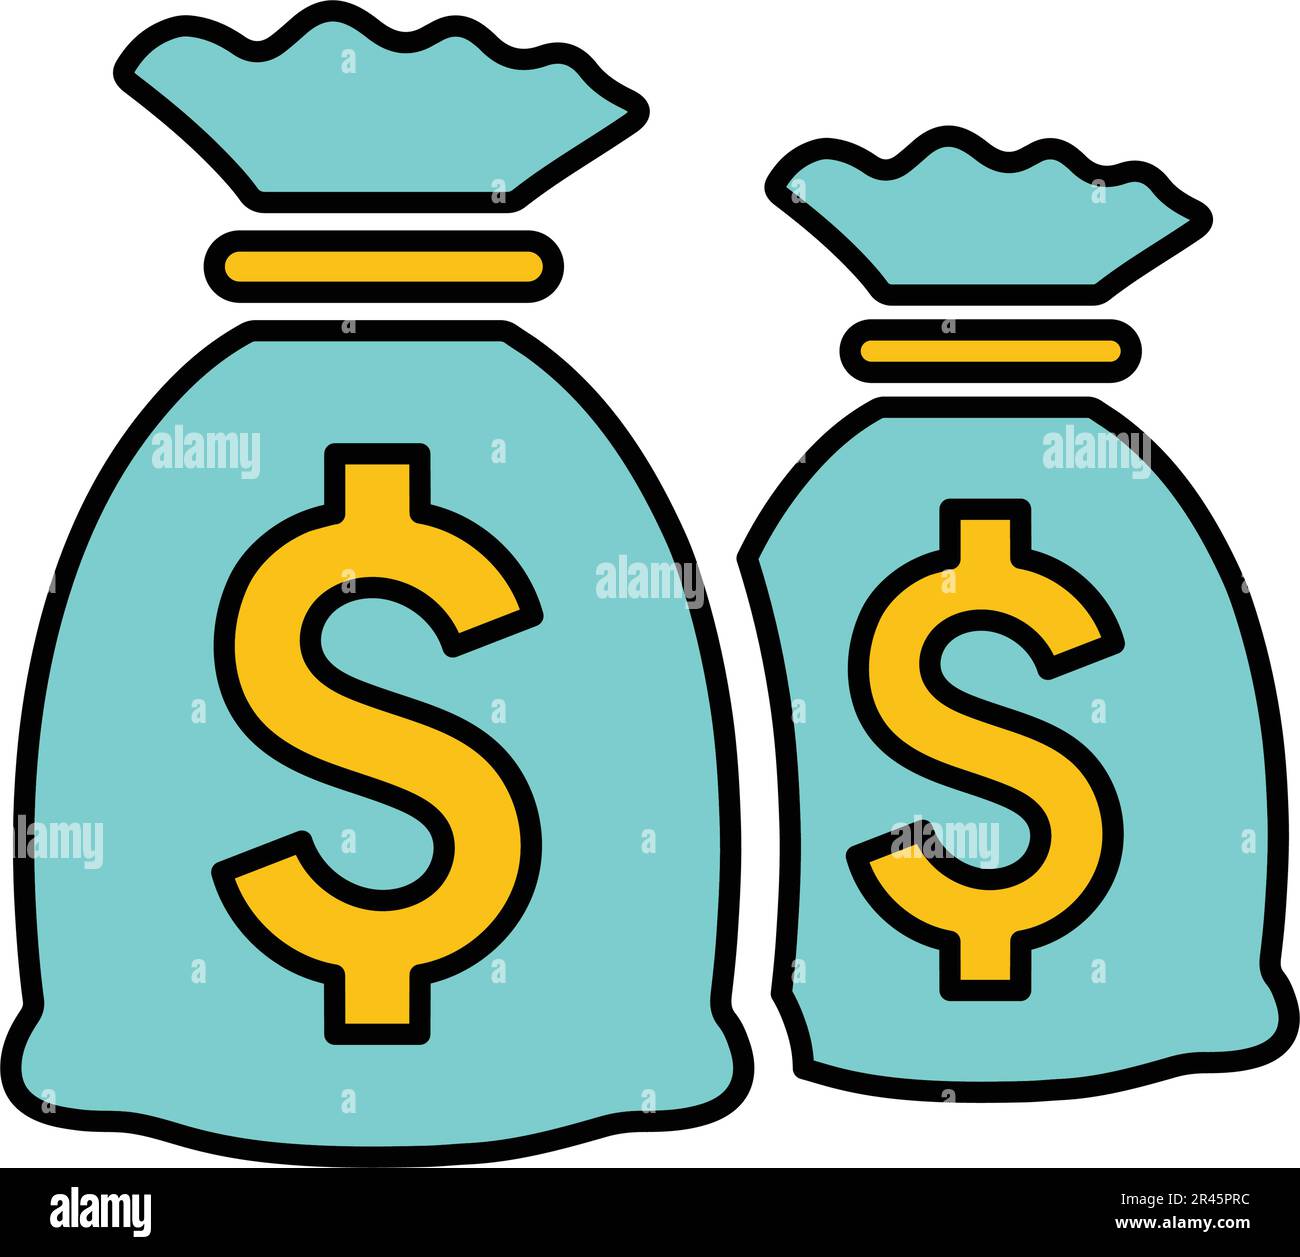 Big capital, money bag icon. Simple vector illustration for web, print files, graphic or commercial purposes. Stock Vector